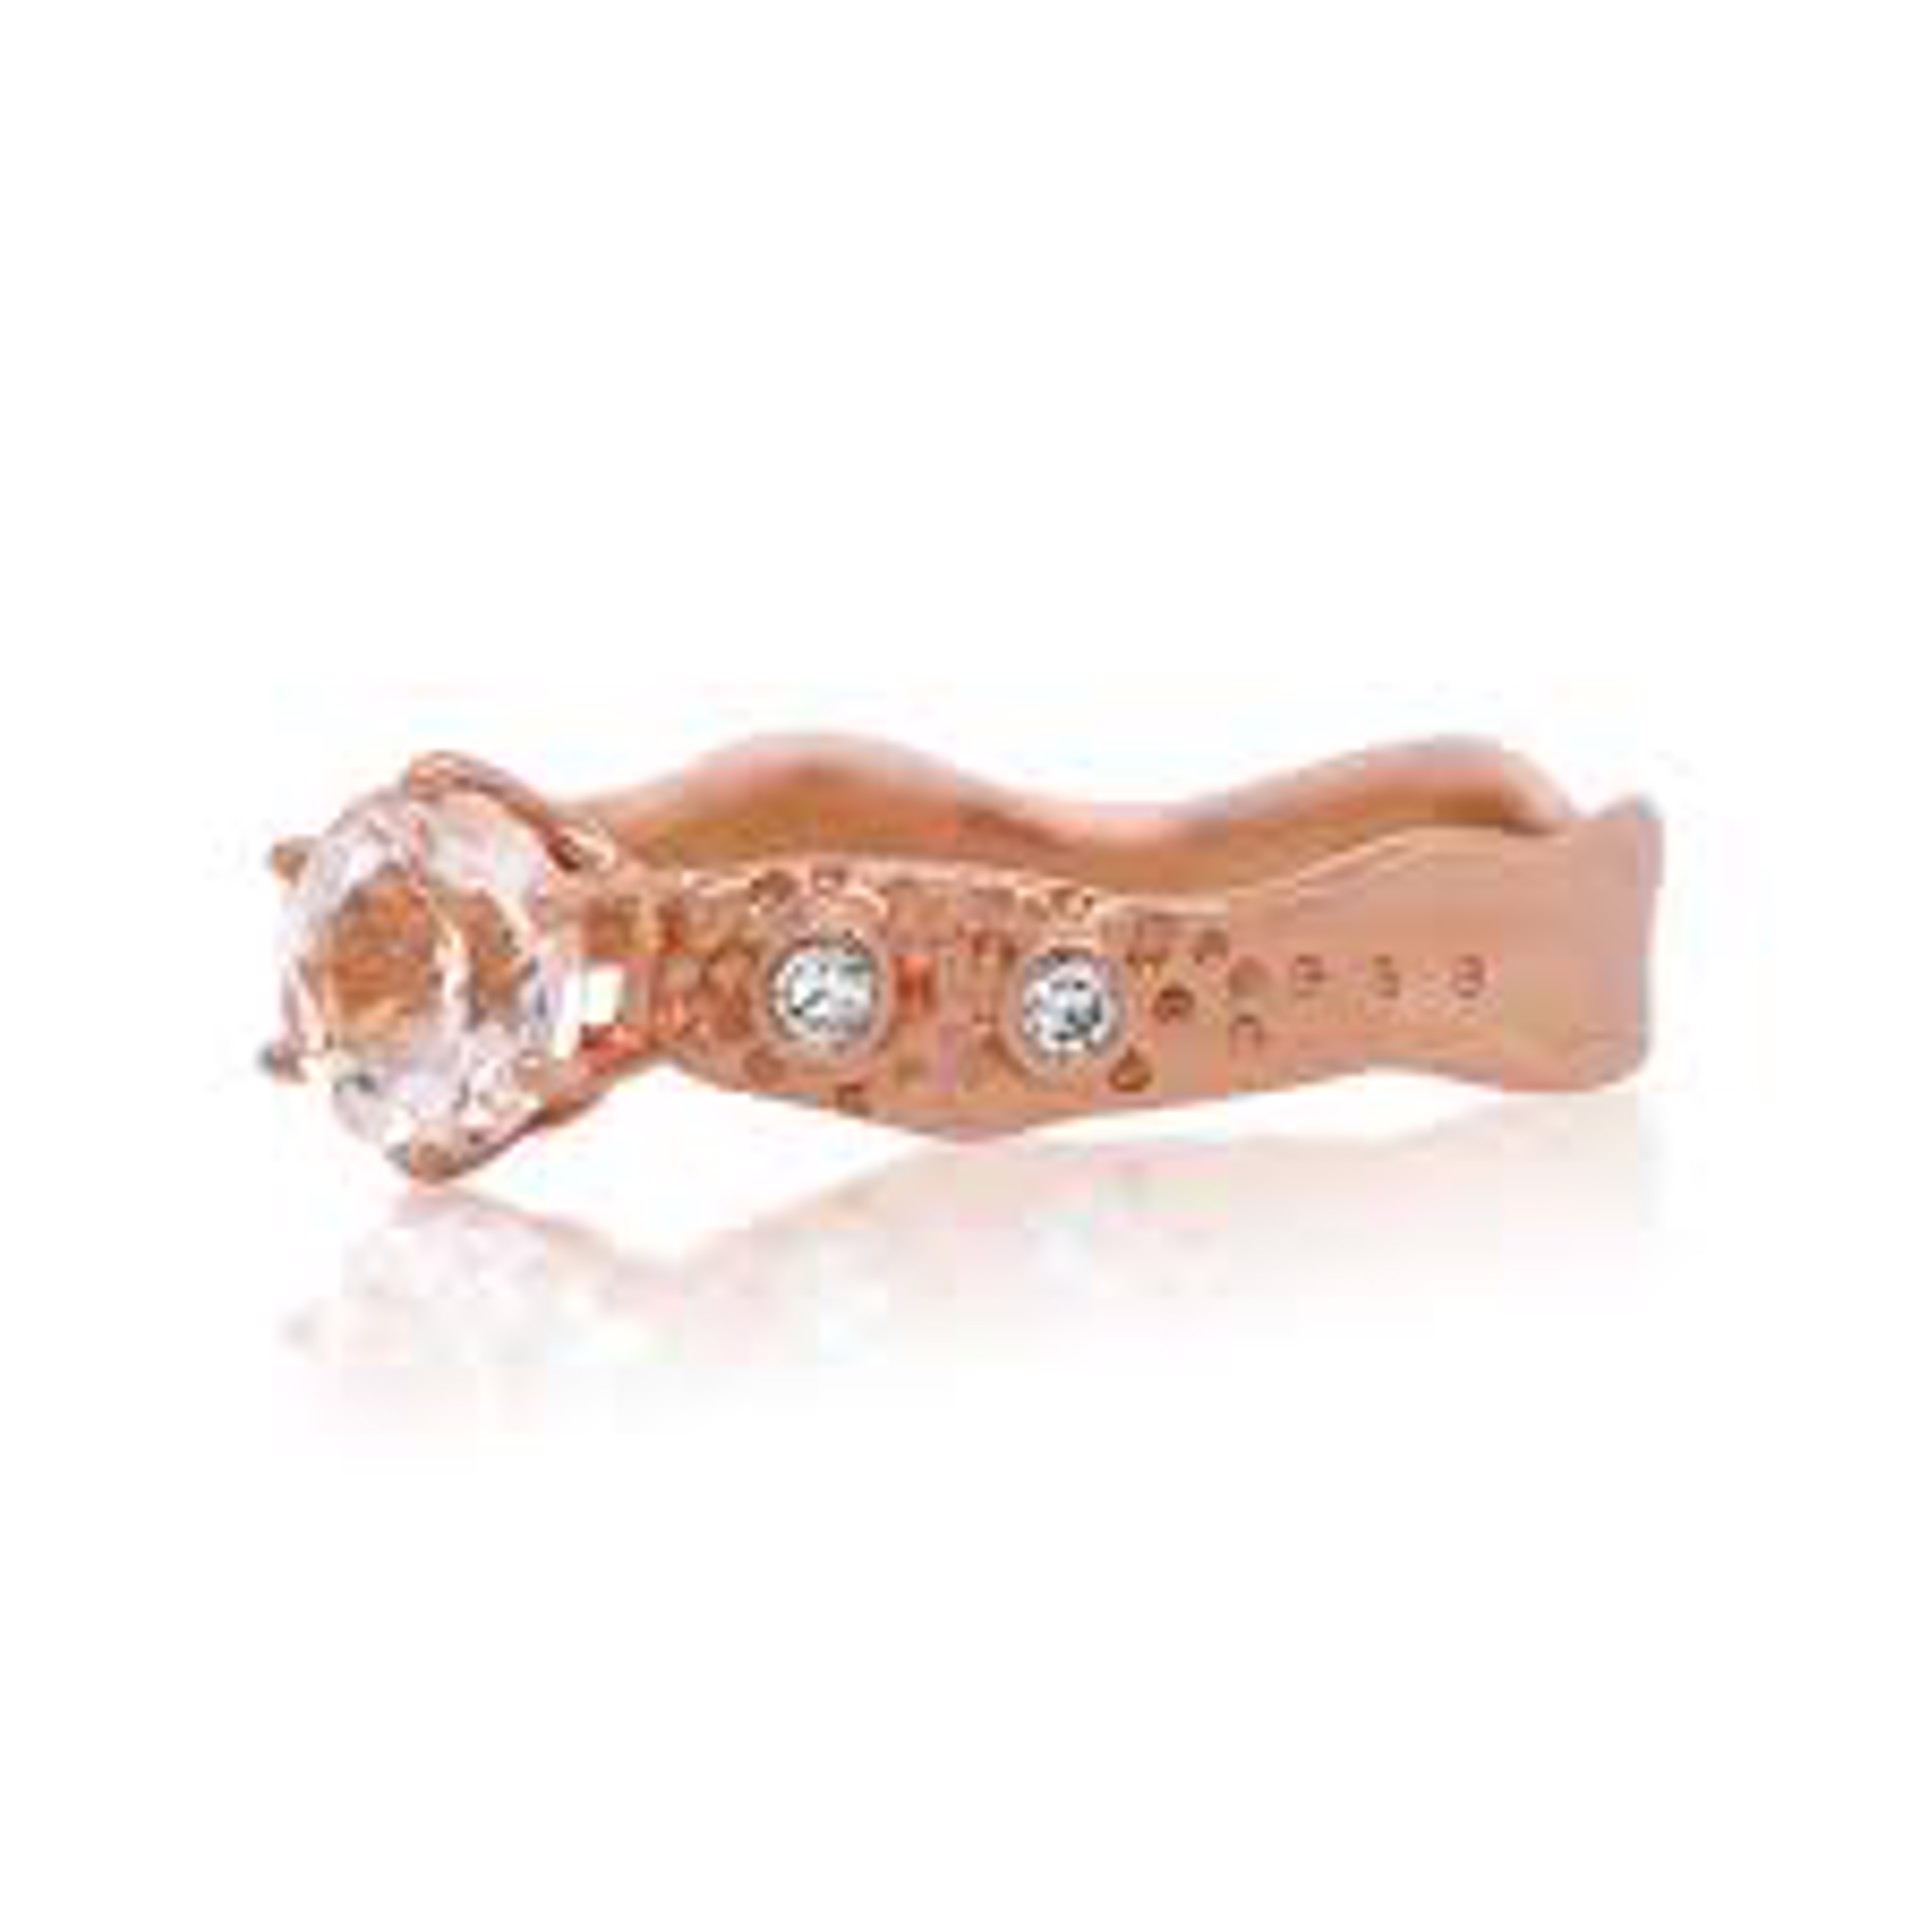 Sunset Sparkle- 18k Rose Gold and Morganite by Kristen Baird